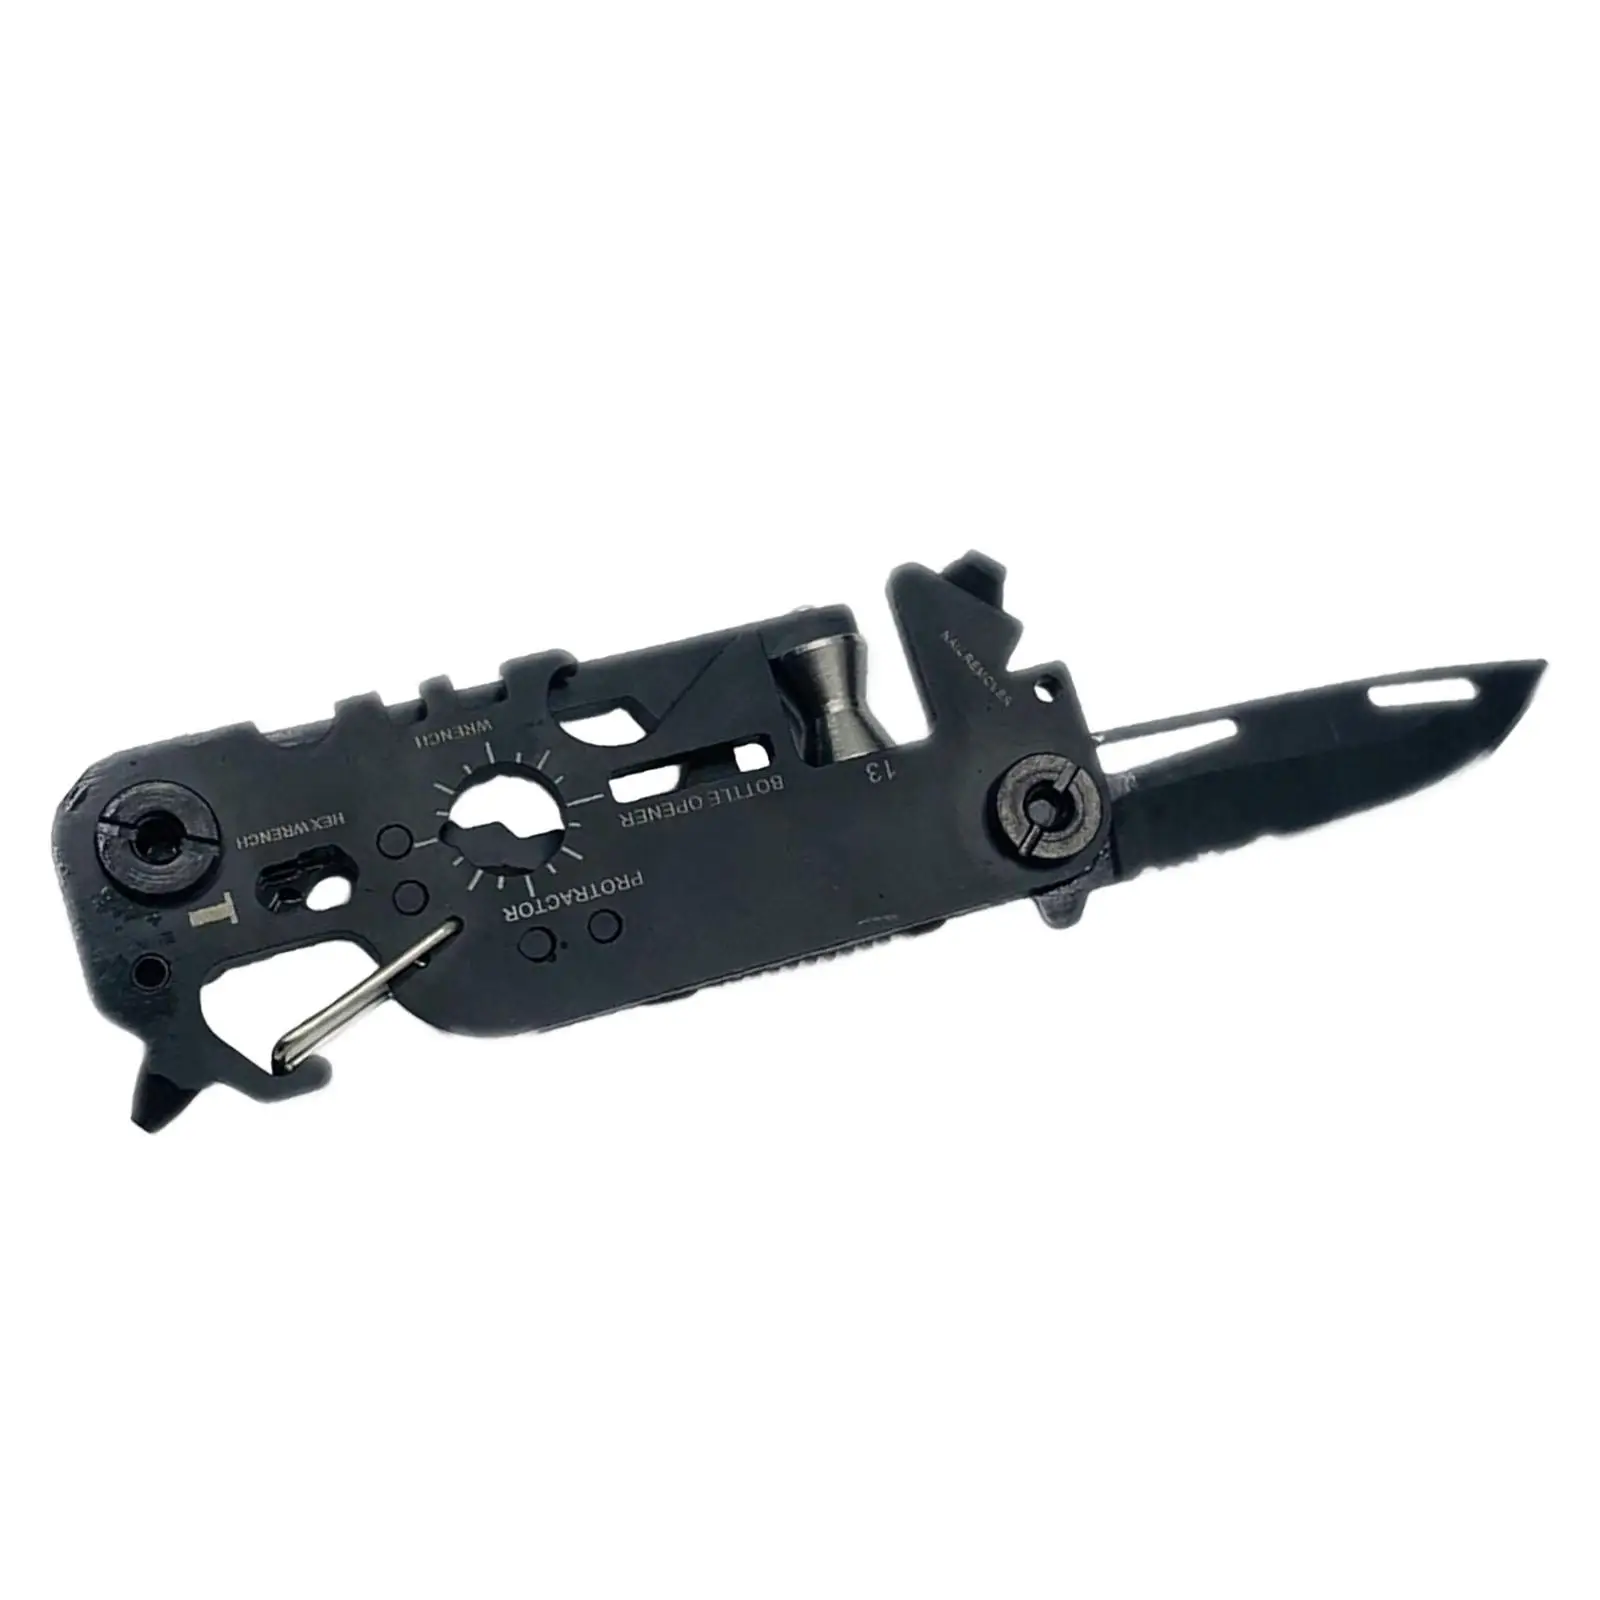 Compact Multitool Combination Tool 30 in 1 Mini Pocket Tool Tool for Daily Outdoor Carrying